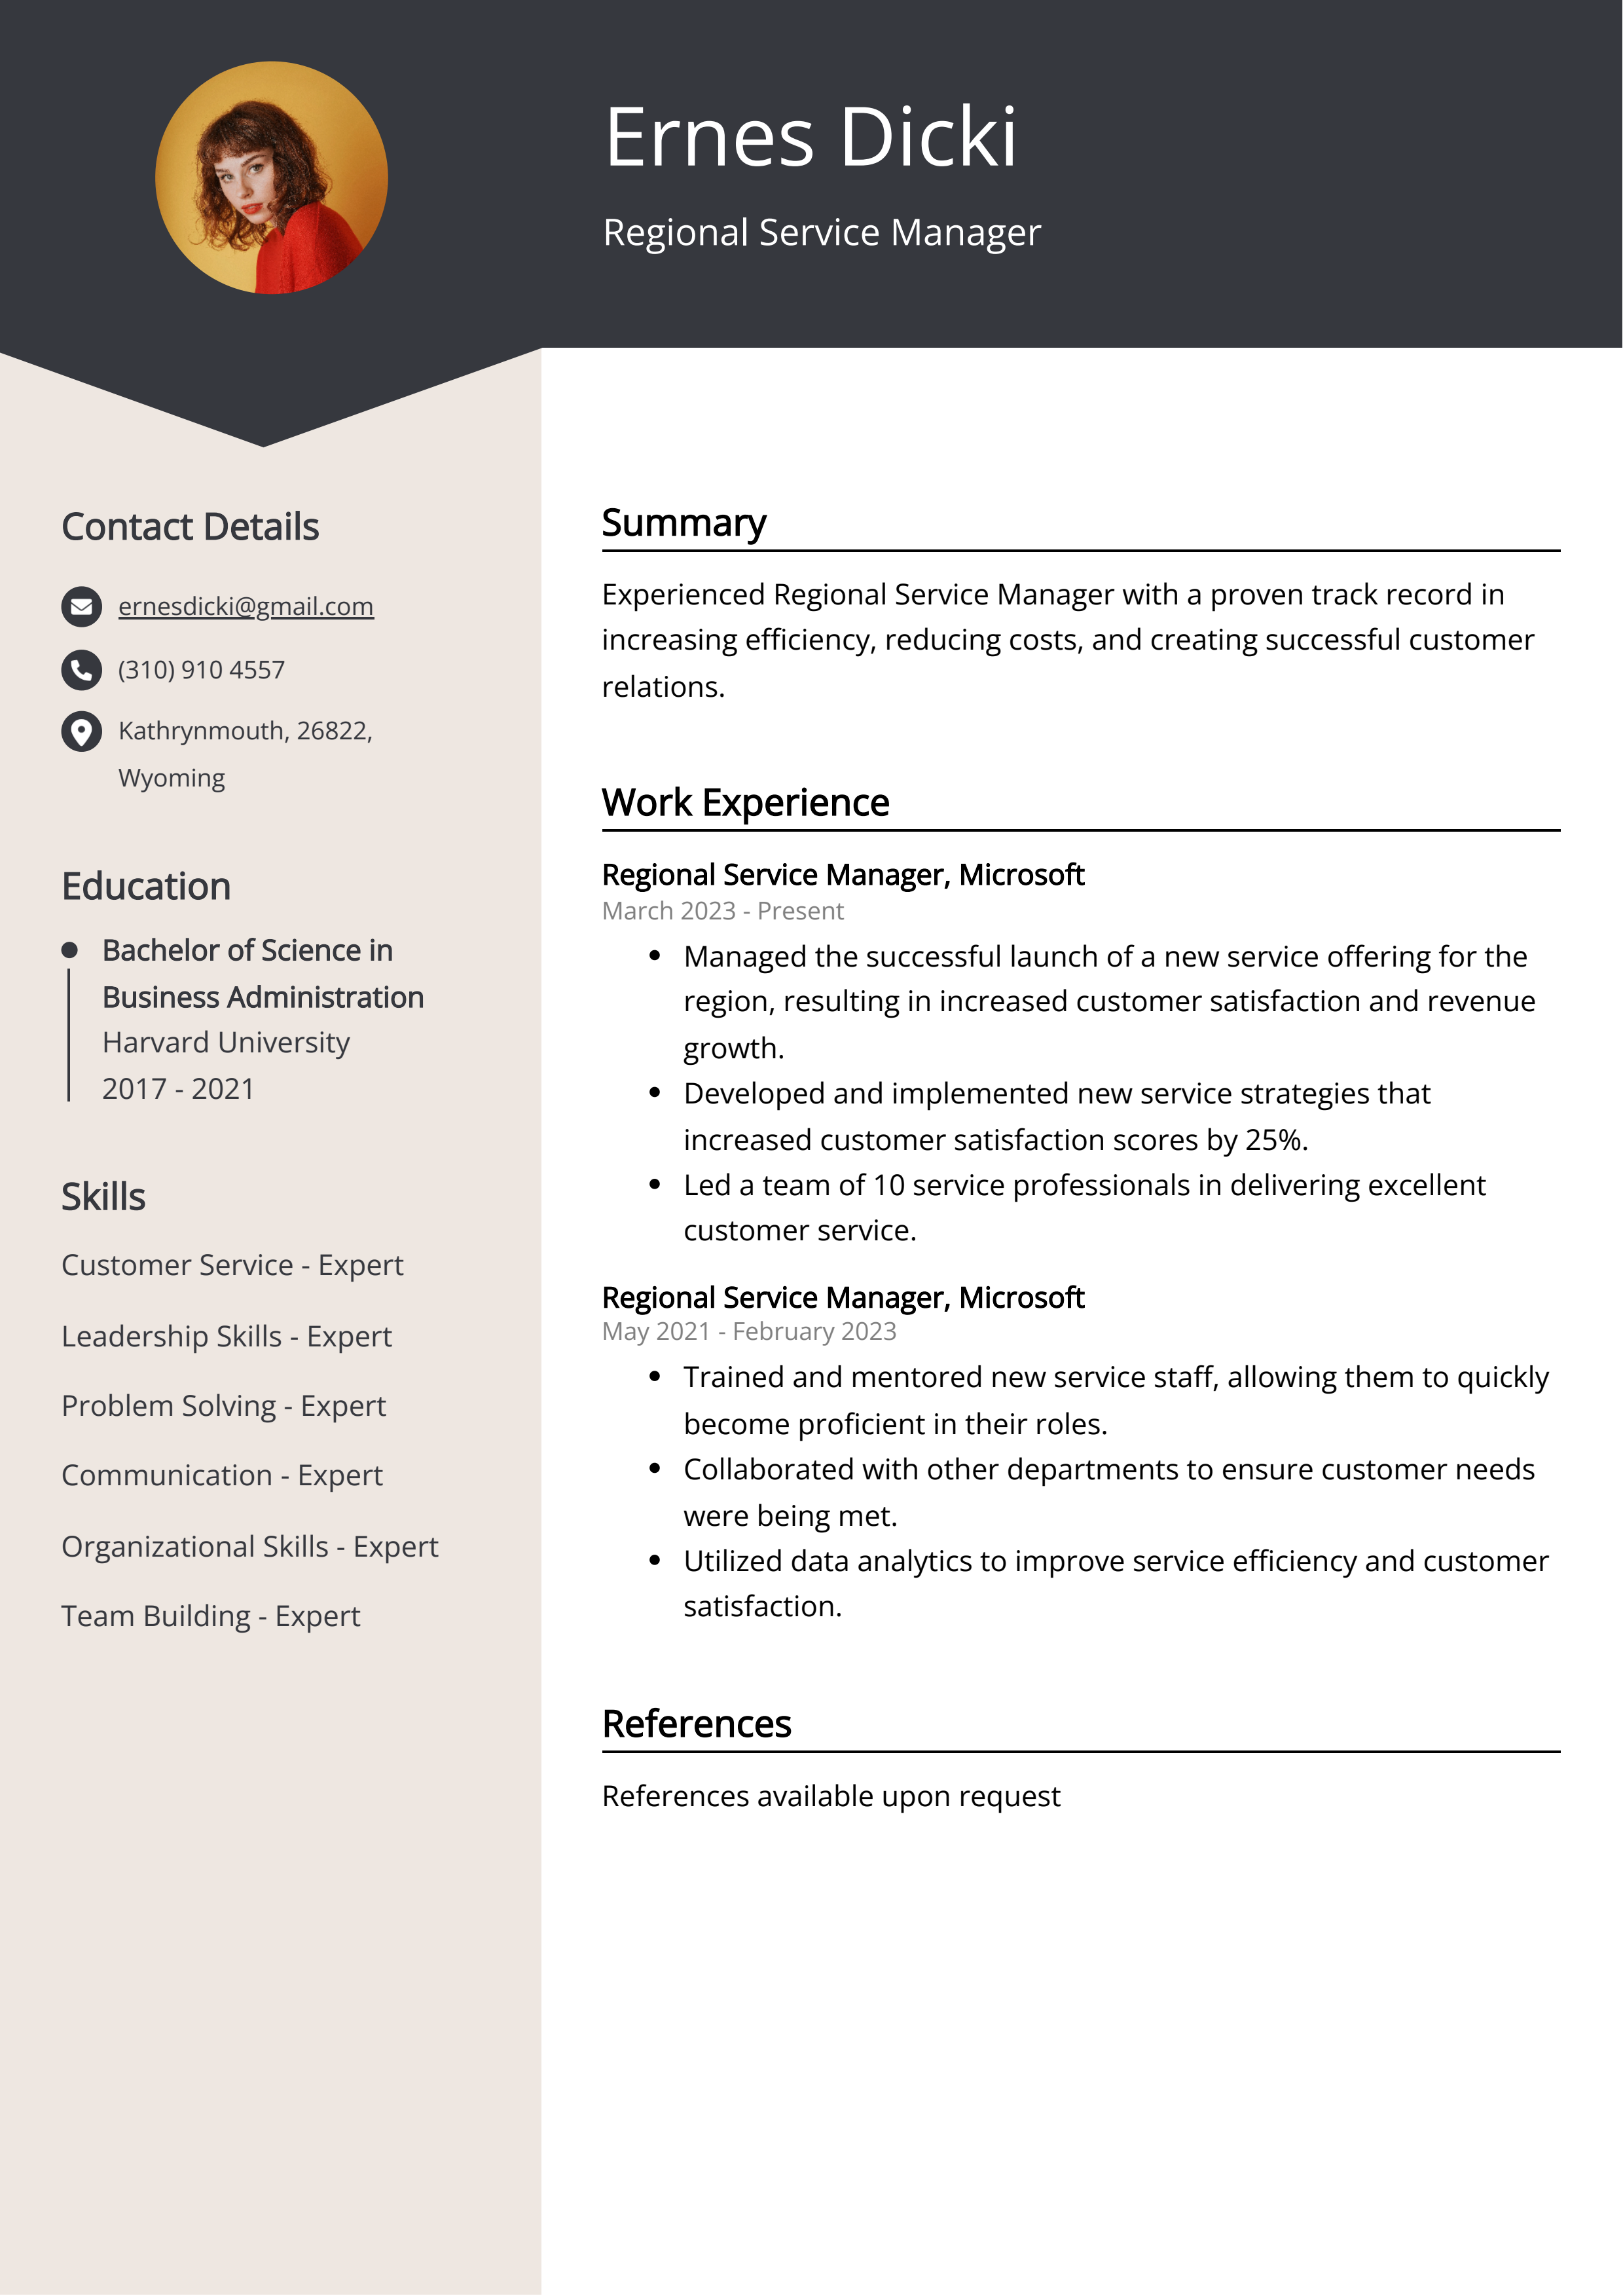 Regional Service Manager Resume Example